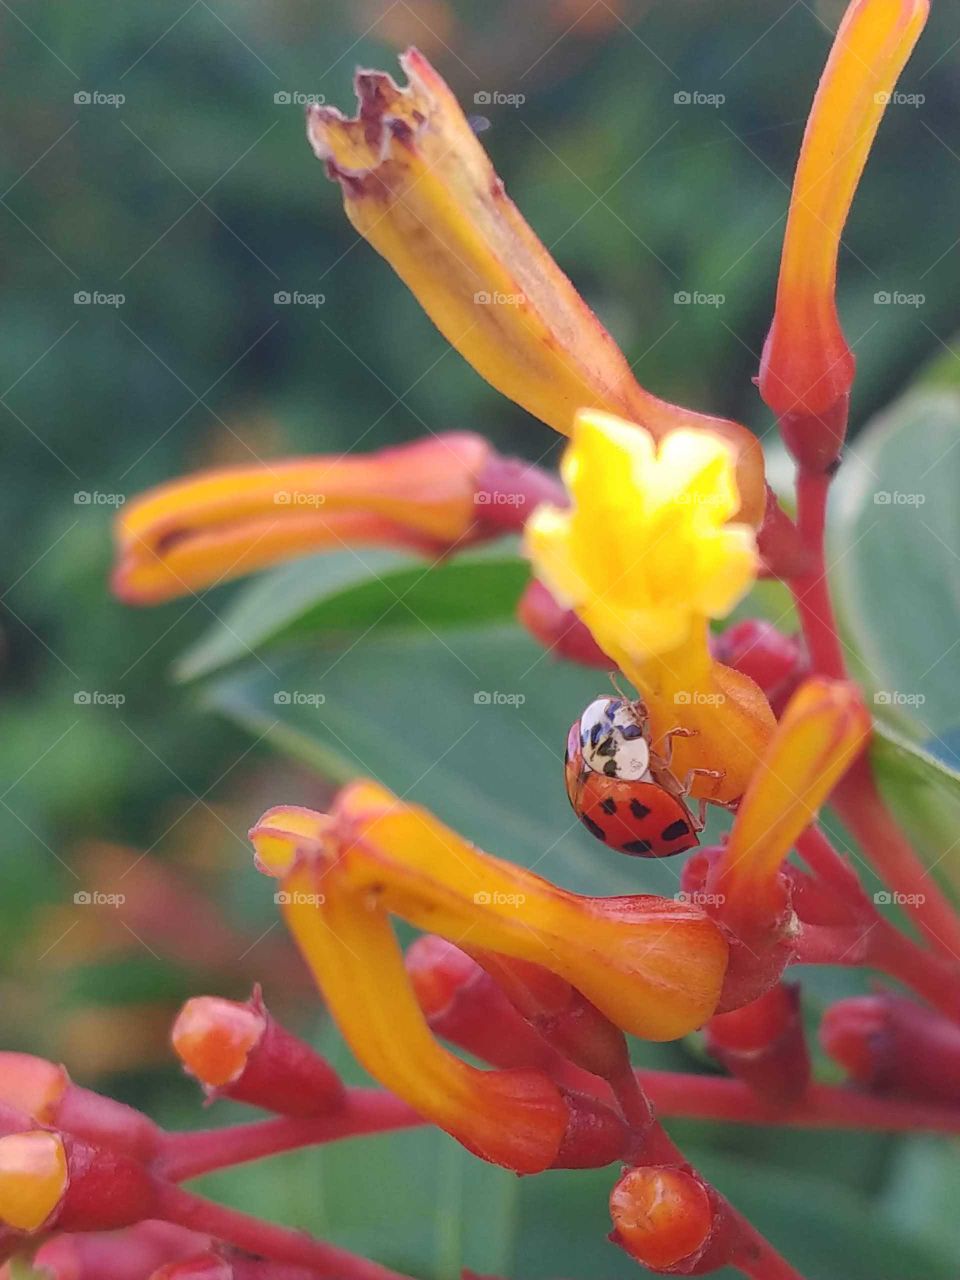 Bright red ladybug crawling on bright yellow, orange, and hot pink flowers.